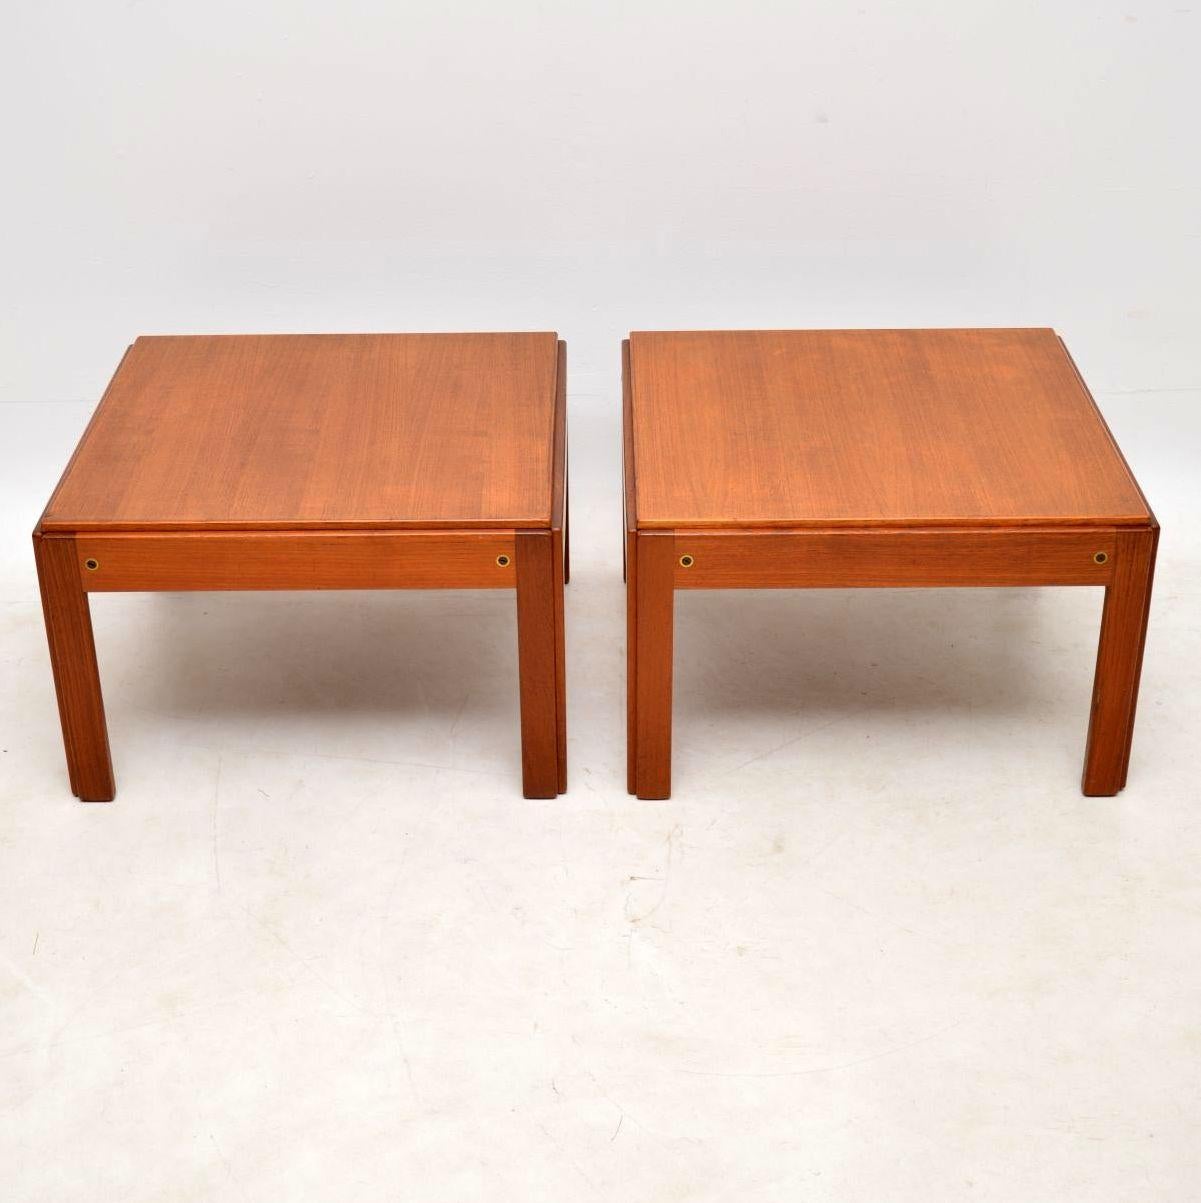 A top quality and very smart pair of Danish teak vintage side tables, these are from the Plexus range, designed by Illum Wikkelso and made by CFC Silkeborg. They date from the 1960s and are in excellent condition for their age. There is just some